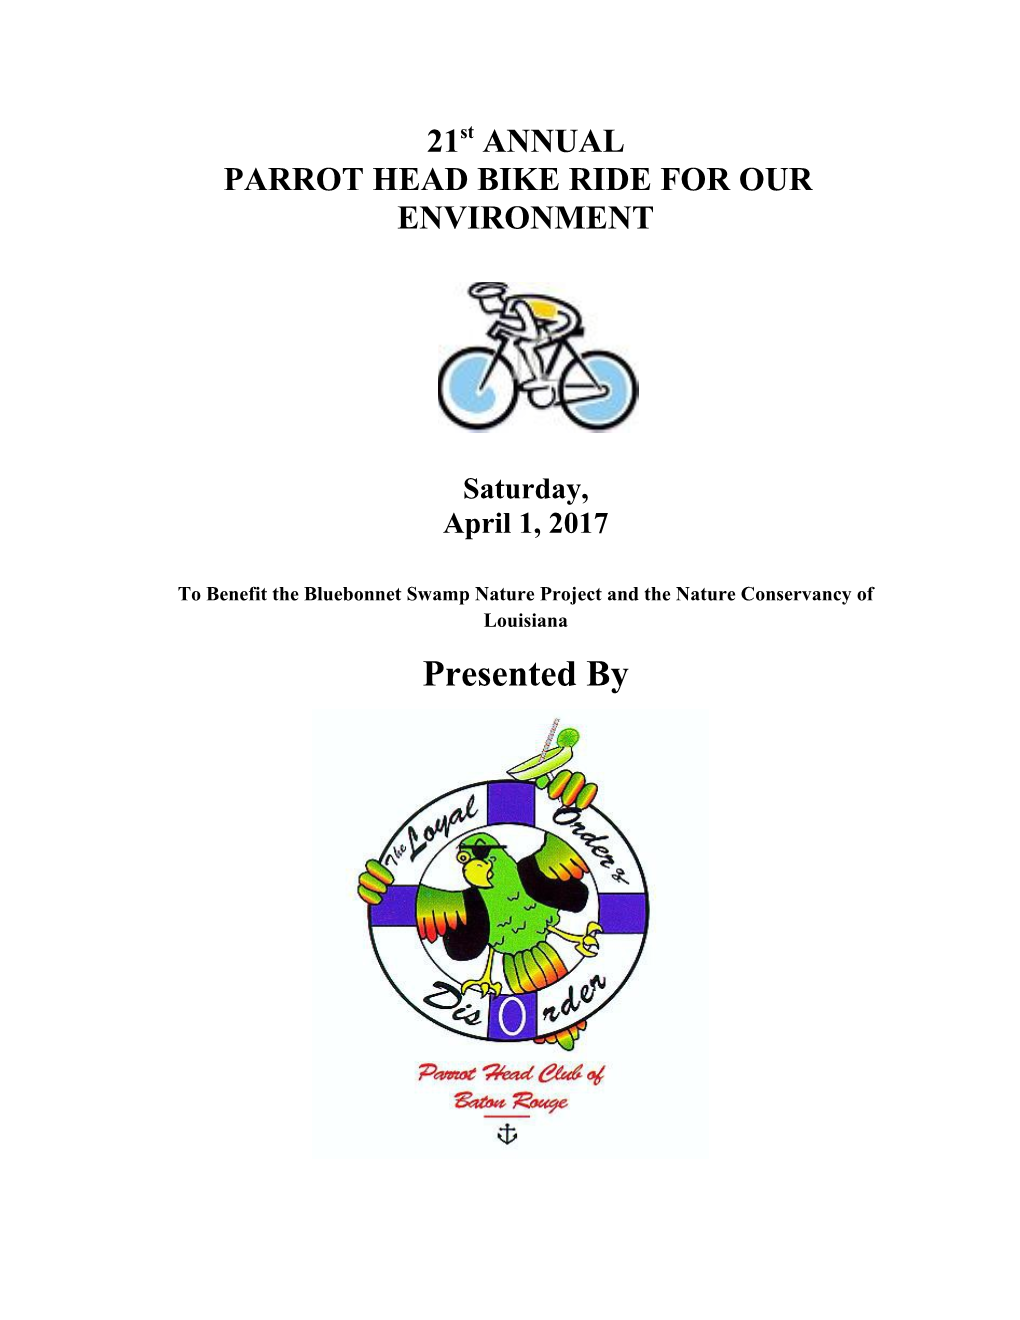 Parrot Head Bike Ride for Our Environment